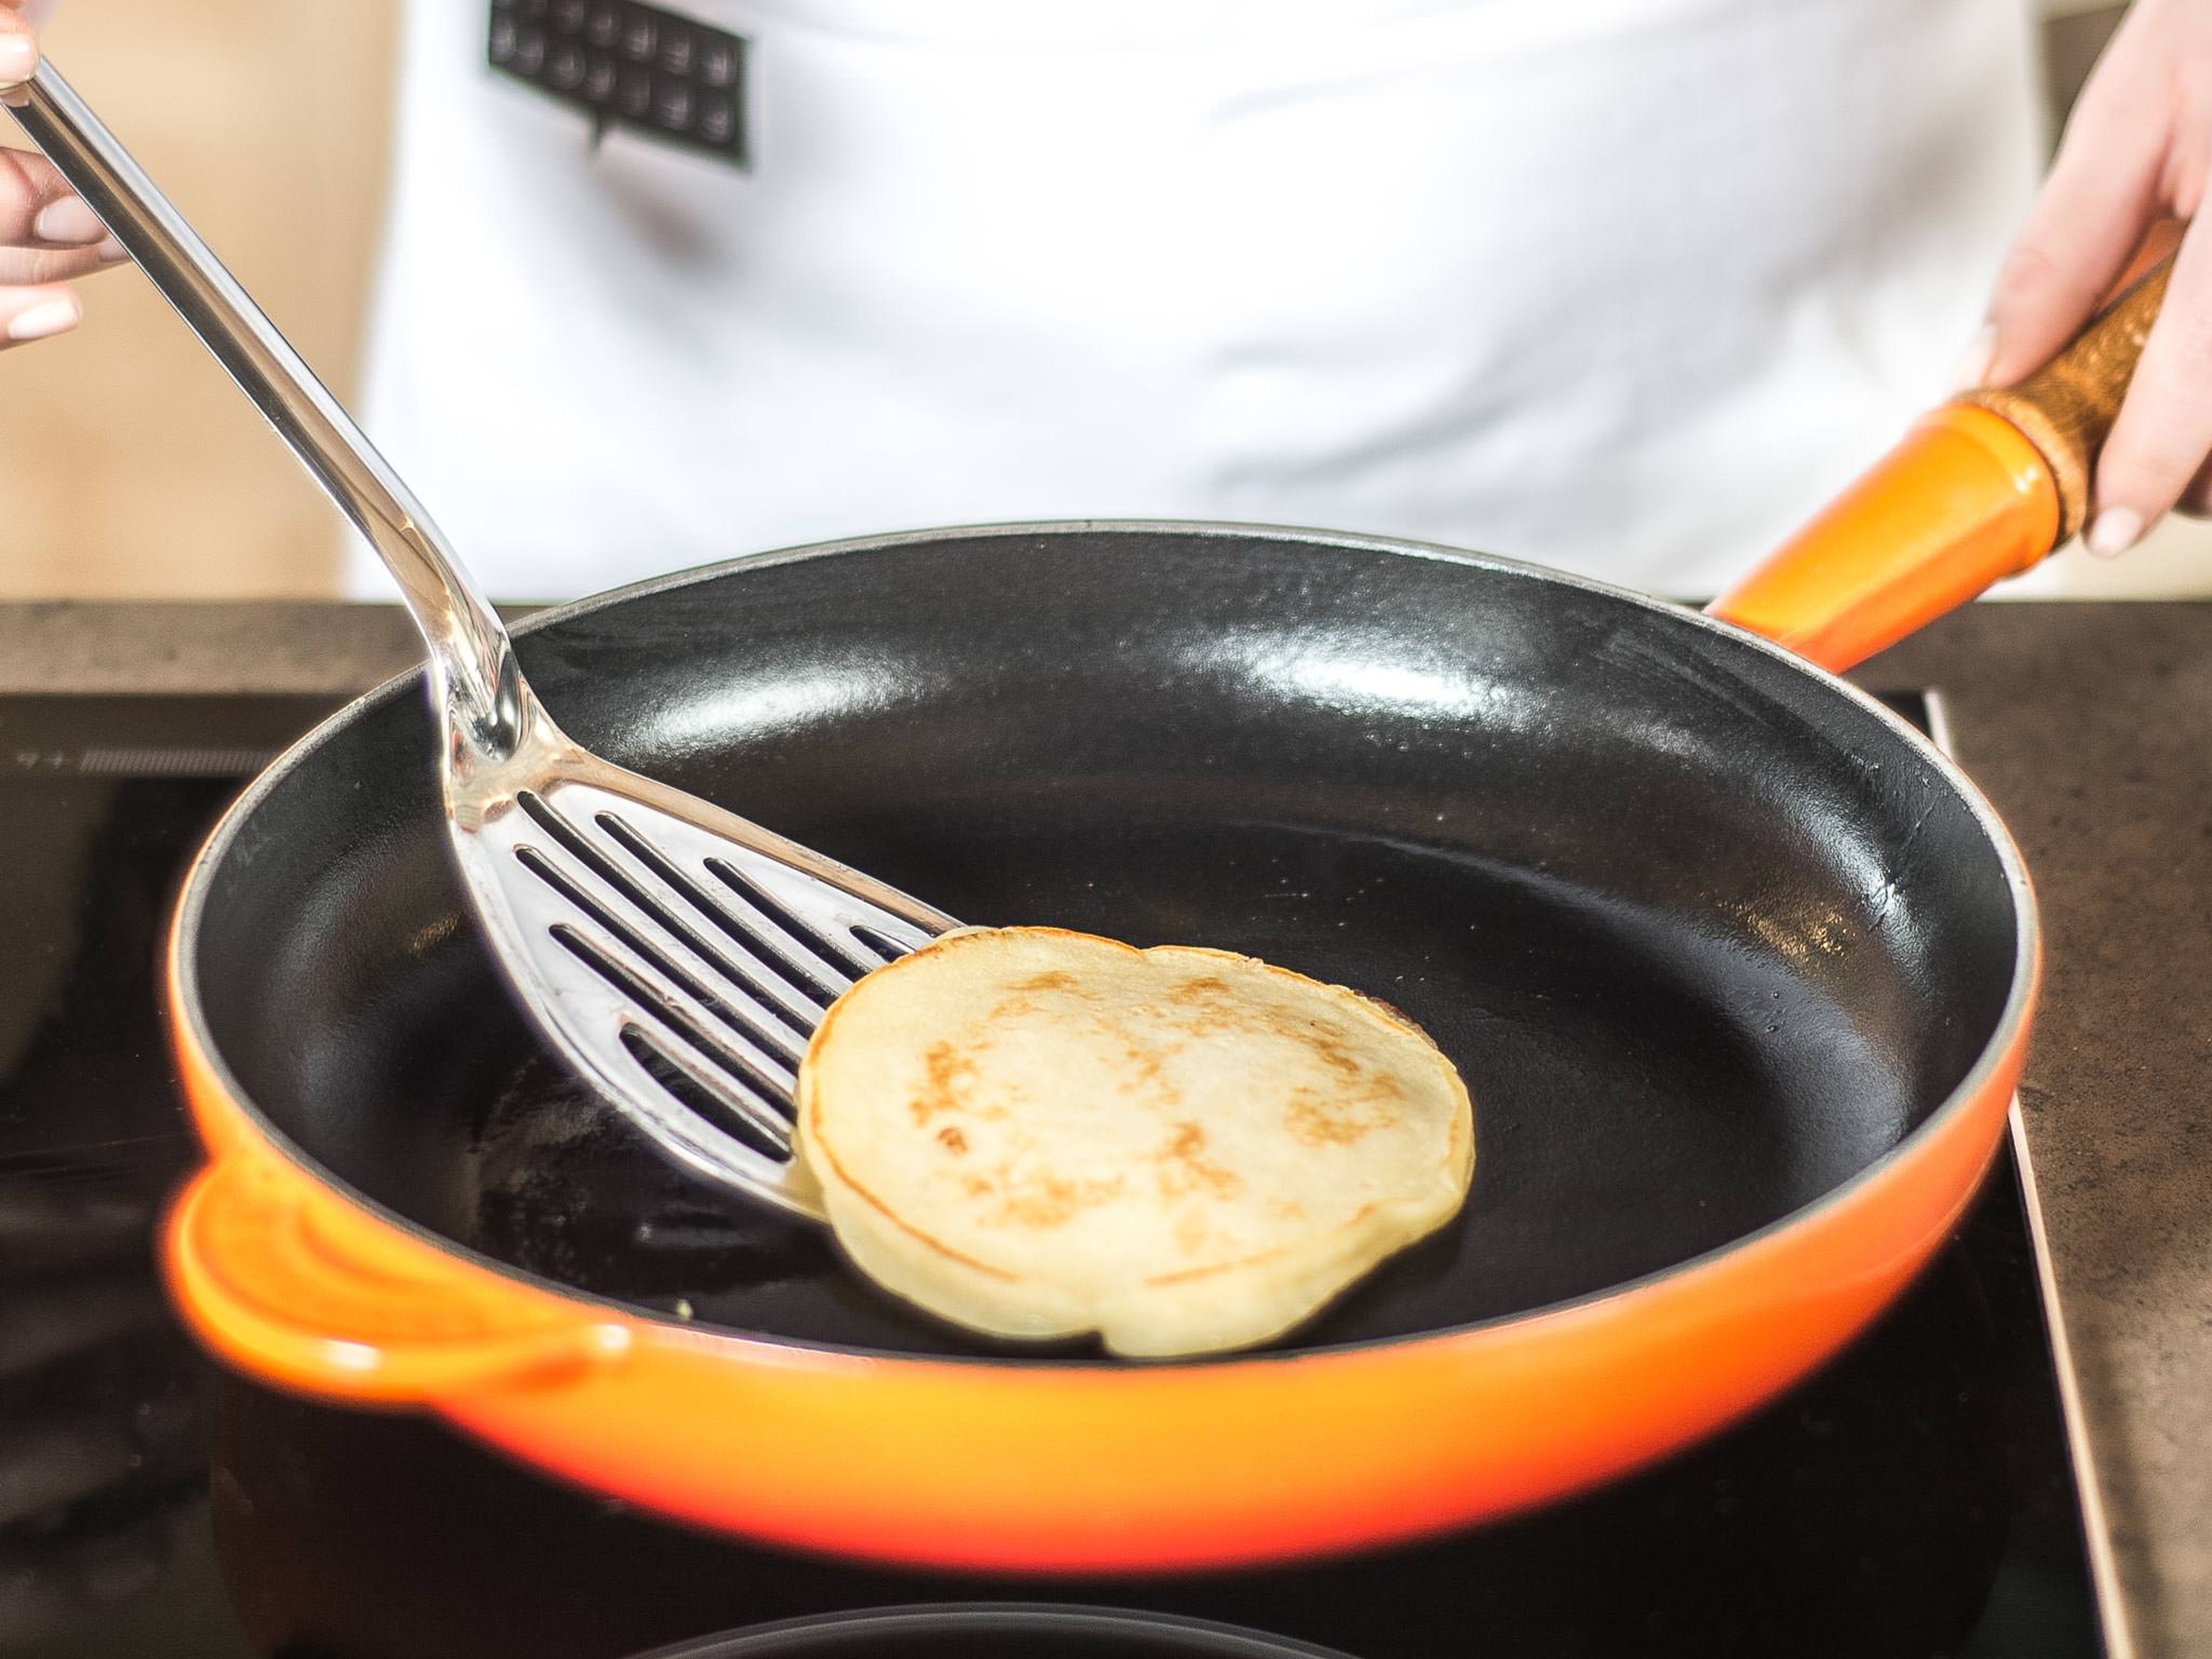 Drop batter into skillet and cook on medium heat until golden-brown (approx. 2 – 3 min. per side, with a diameter of approx. 7cm). Serve with homemade jam or powdered sugar.